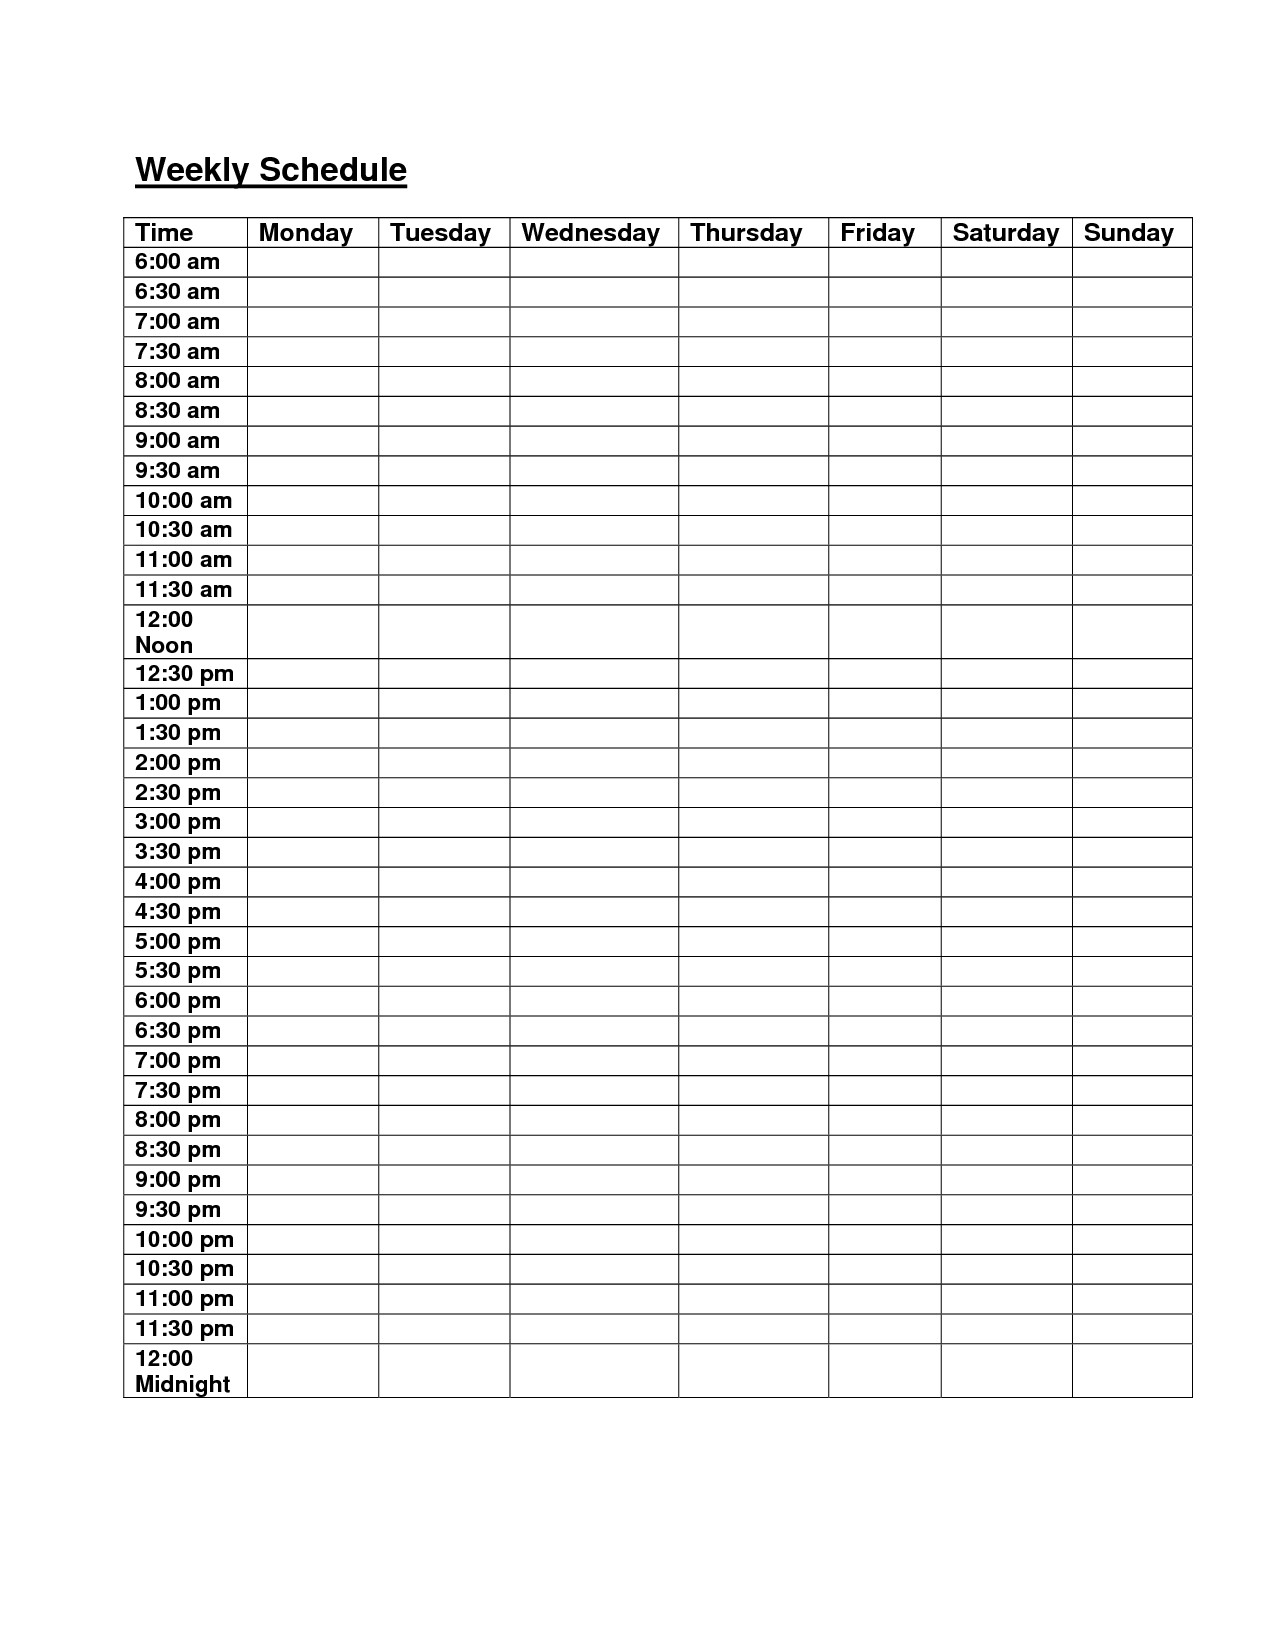 Weekly Time Schedule Template Printable Daily Schedule